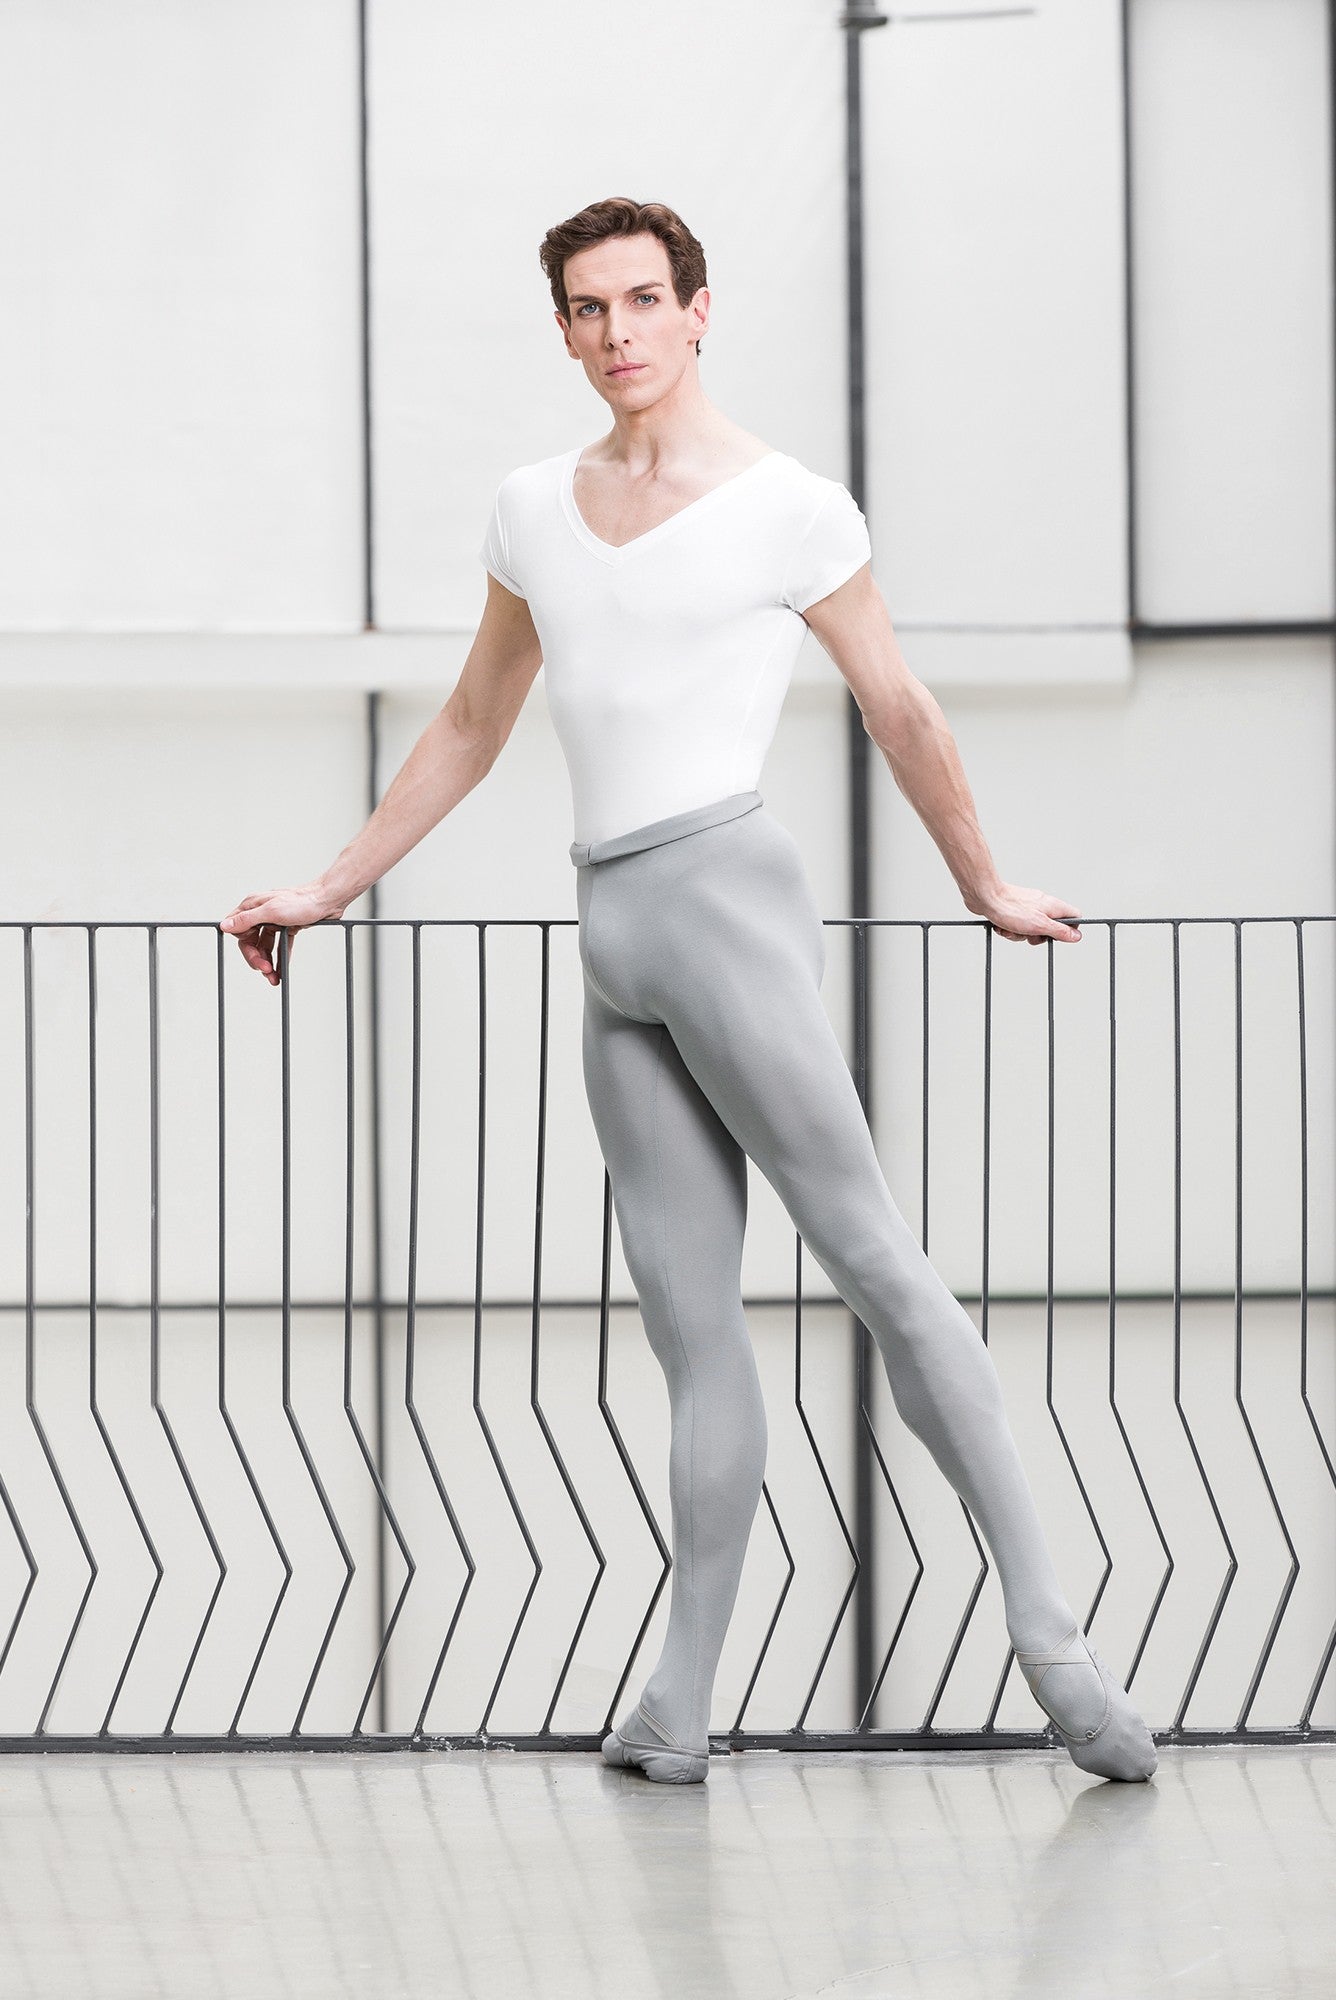 Capezio Mens Dance Tights, Dance Tights Men Can Wear For Many